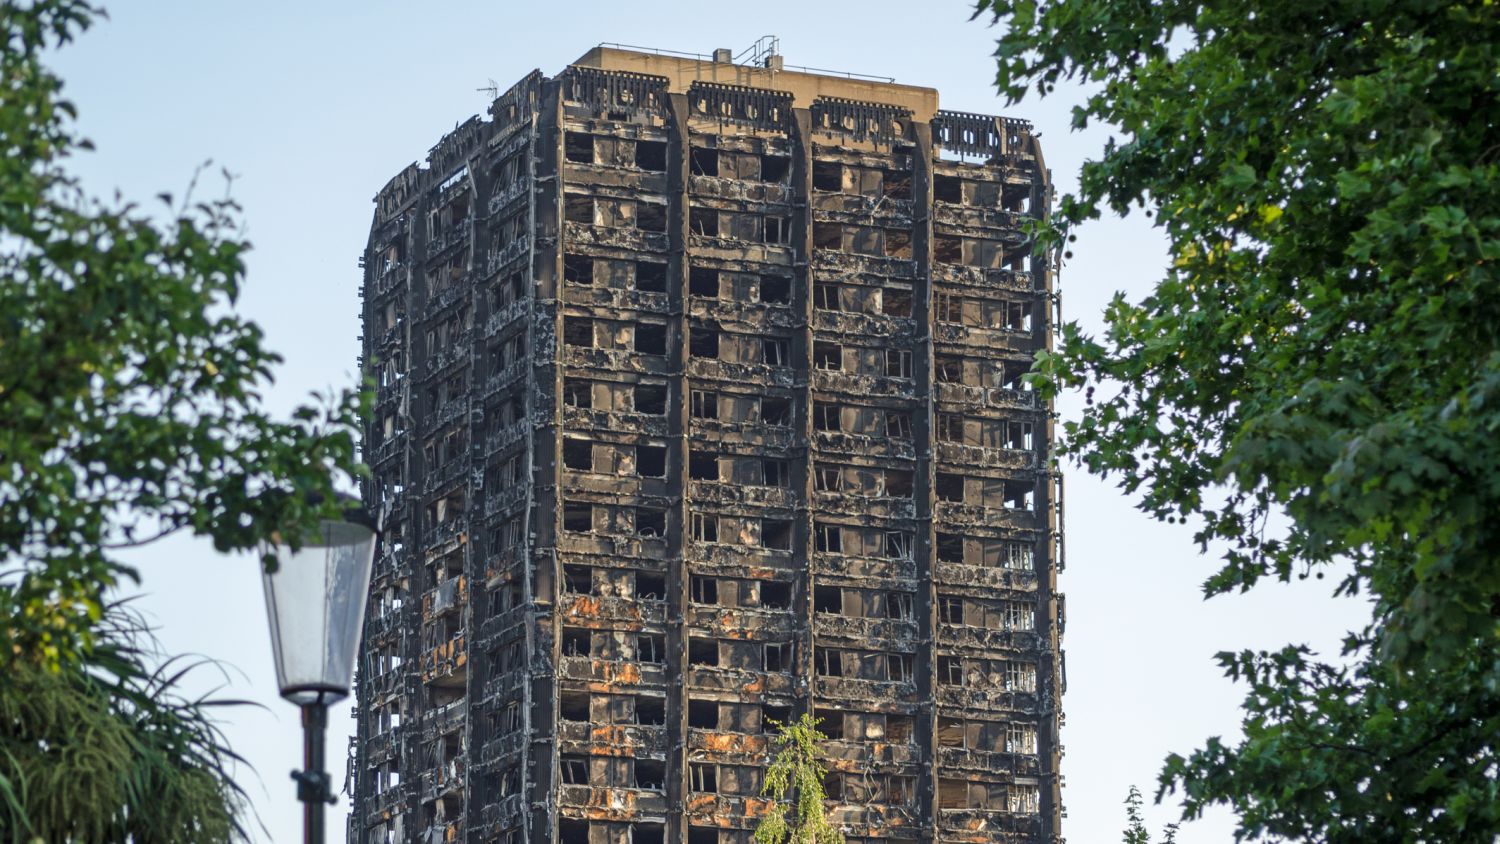 Grenfell Tower in the aftermath of the fire that killed 72 people five years ago this week (Photo 95602226 © Basphoto | Dreamstime.com)